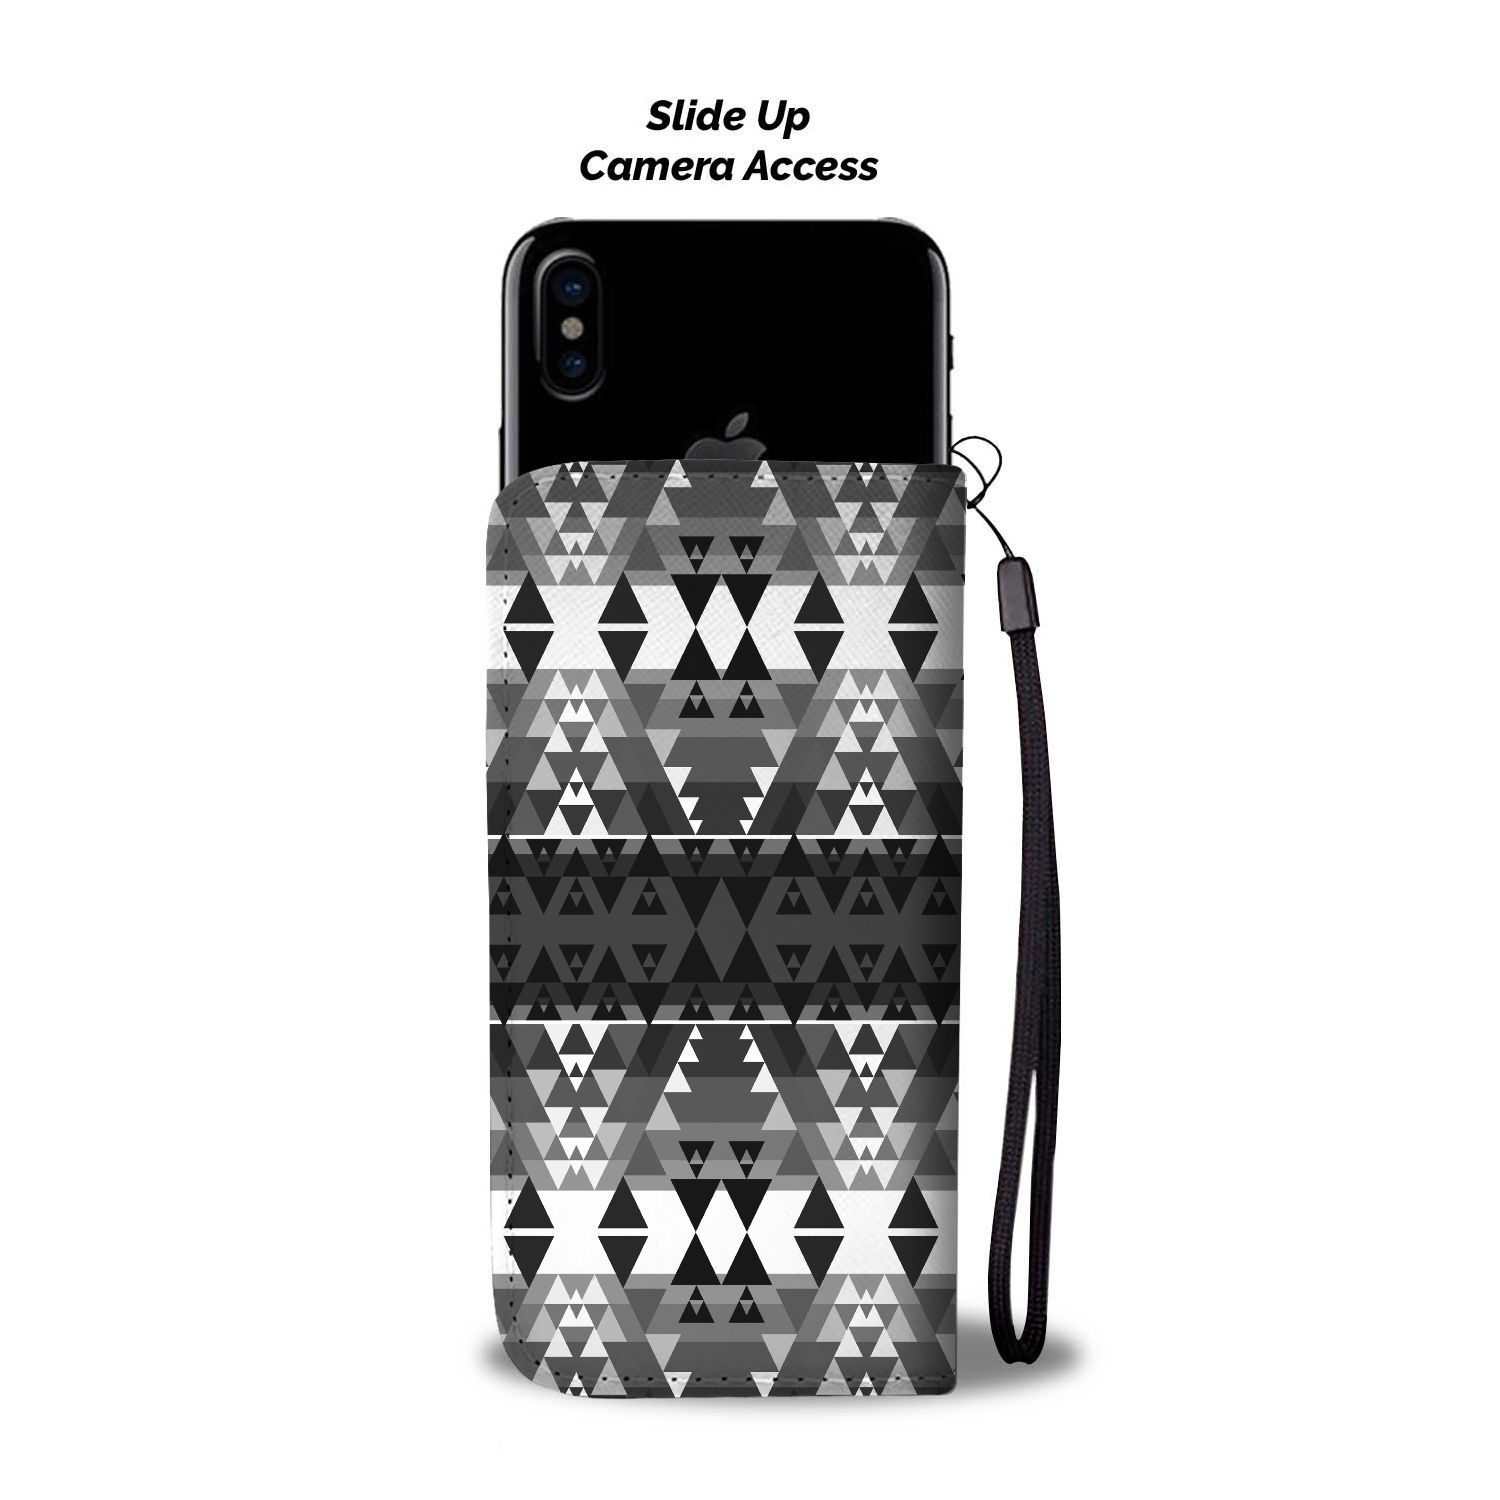 Writing on Stone Black and White Phone Wallet cell phone wallet wc-fulfillment 